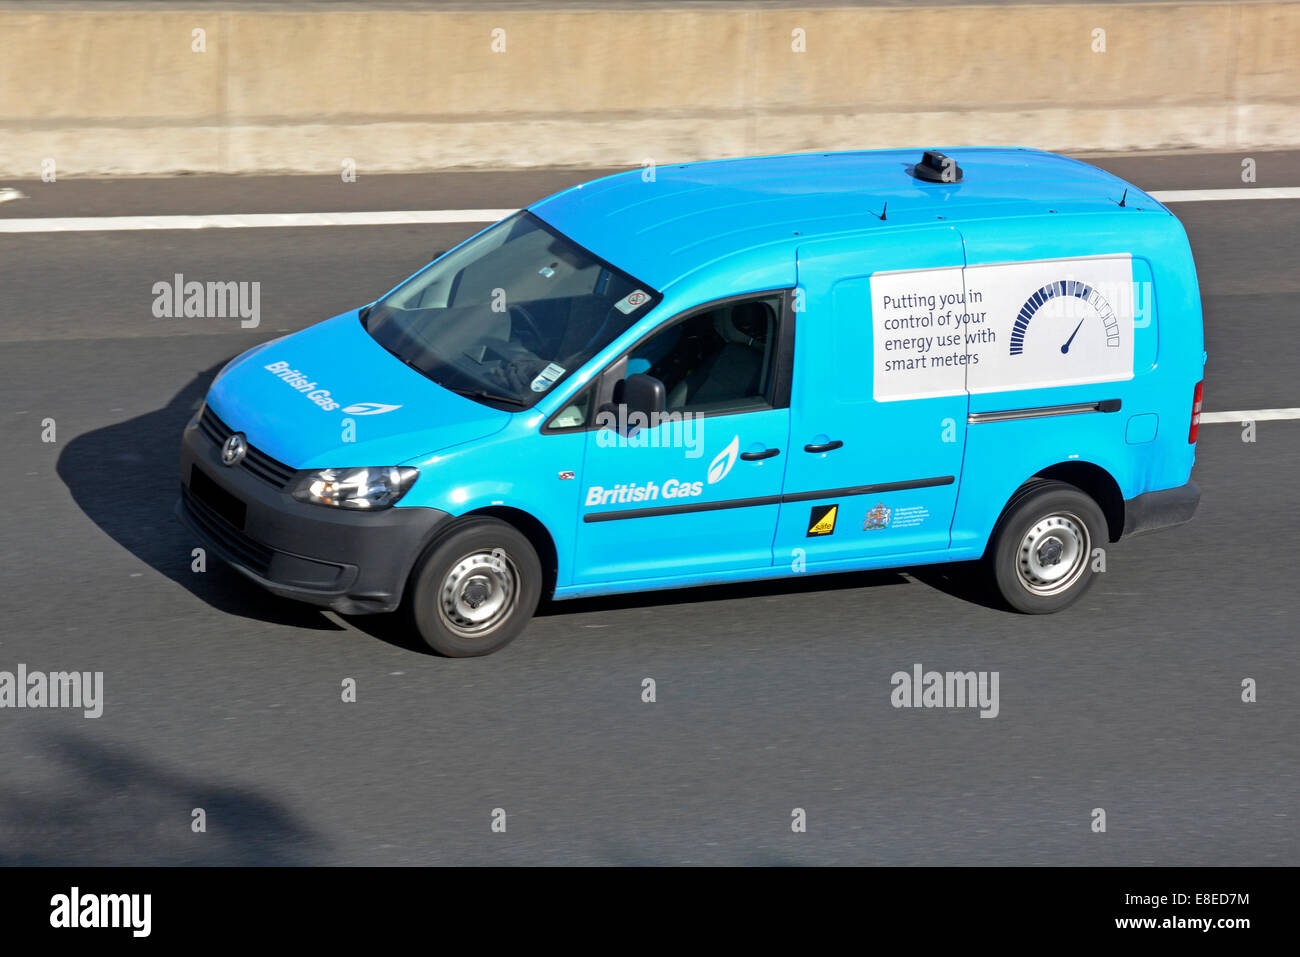 British Gas view from above commercial vehicle van driving on M25 motorway road with advertising panel promoting smart energy meters Essex England UK Stock Photo